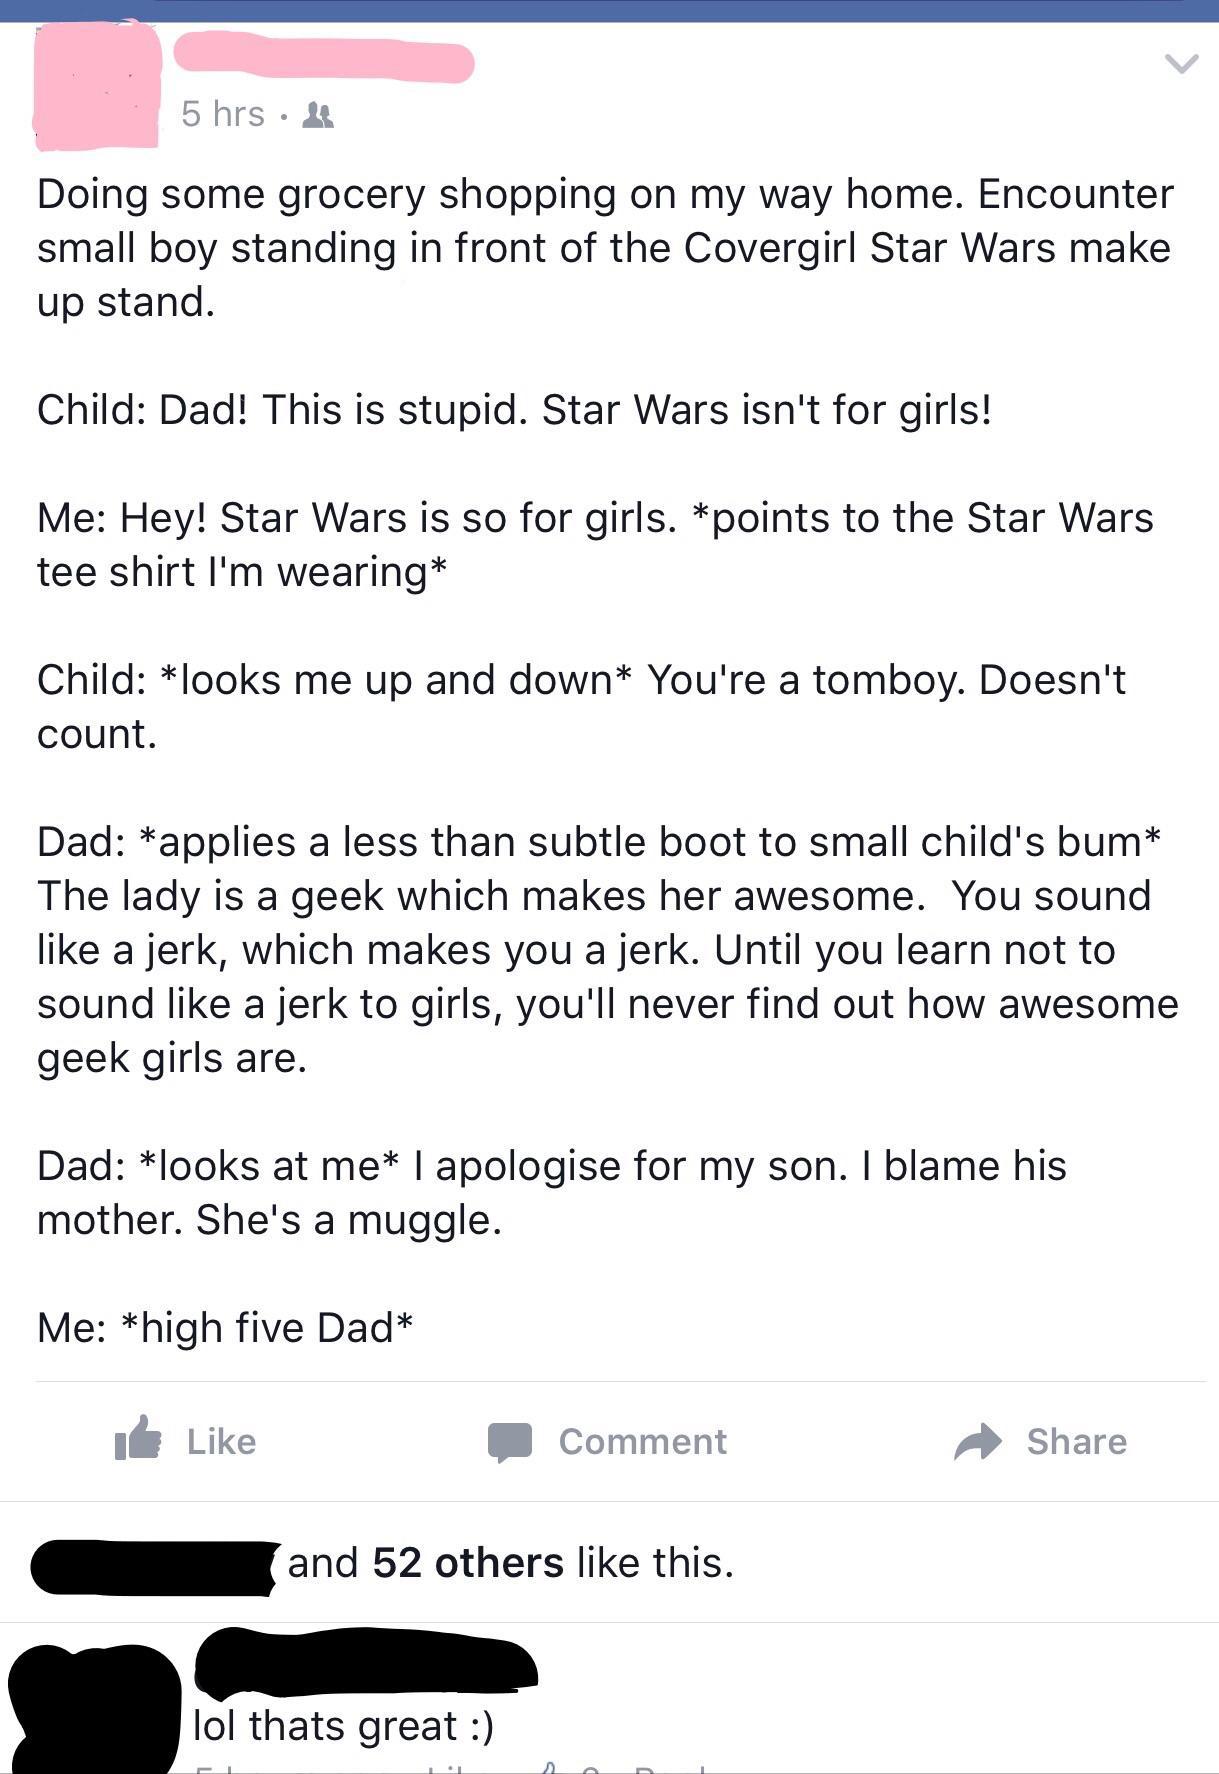 fake stories cringe - 5 hrs Doing some grocery shopping on my way home. Encounter small boy standing in front of the Covergirl Star Wars make up stand. Child Dad! This is stupid. Star Wars isn't for girls! Me Hey! Star Wars is so for girls. points to the 